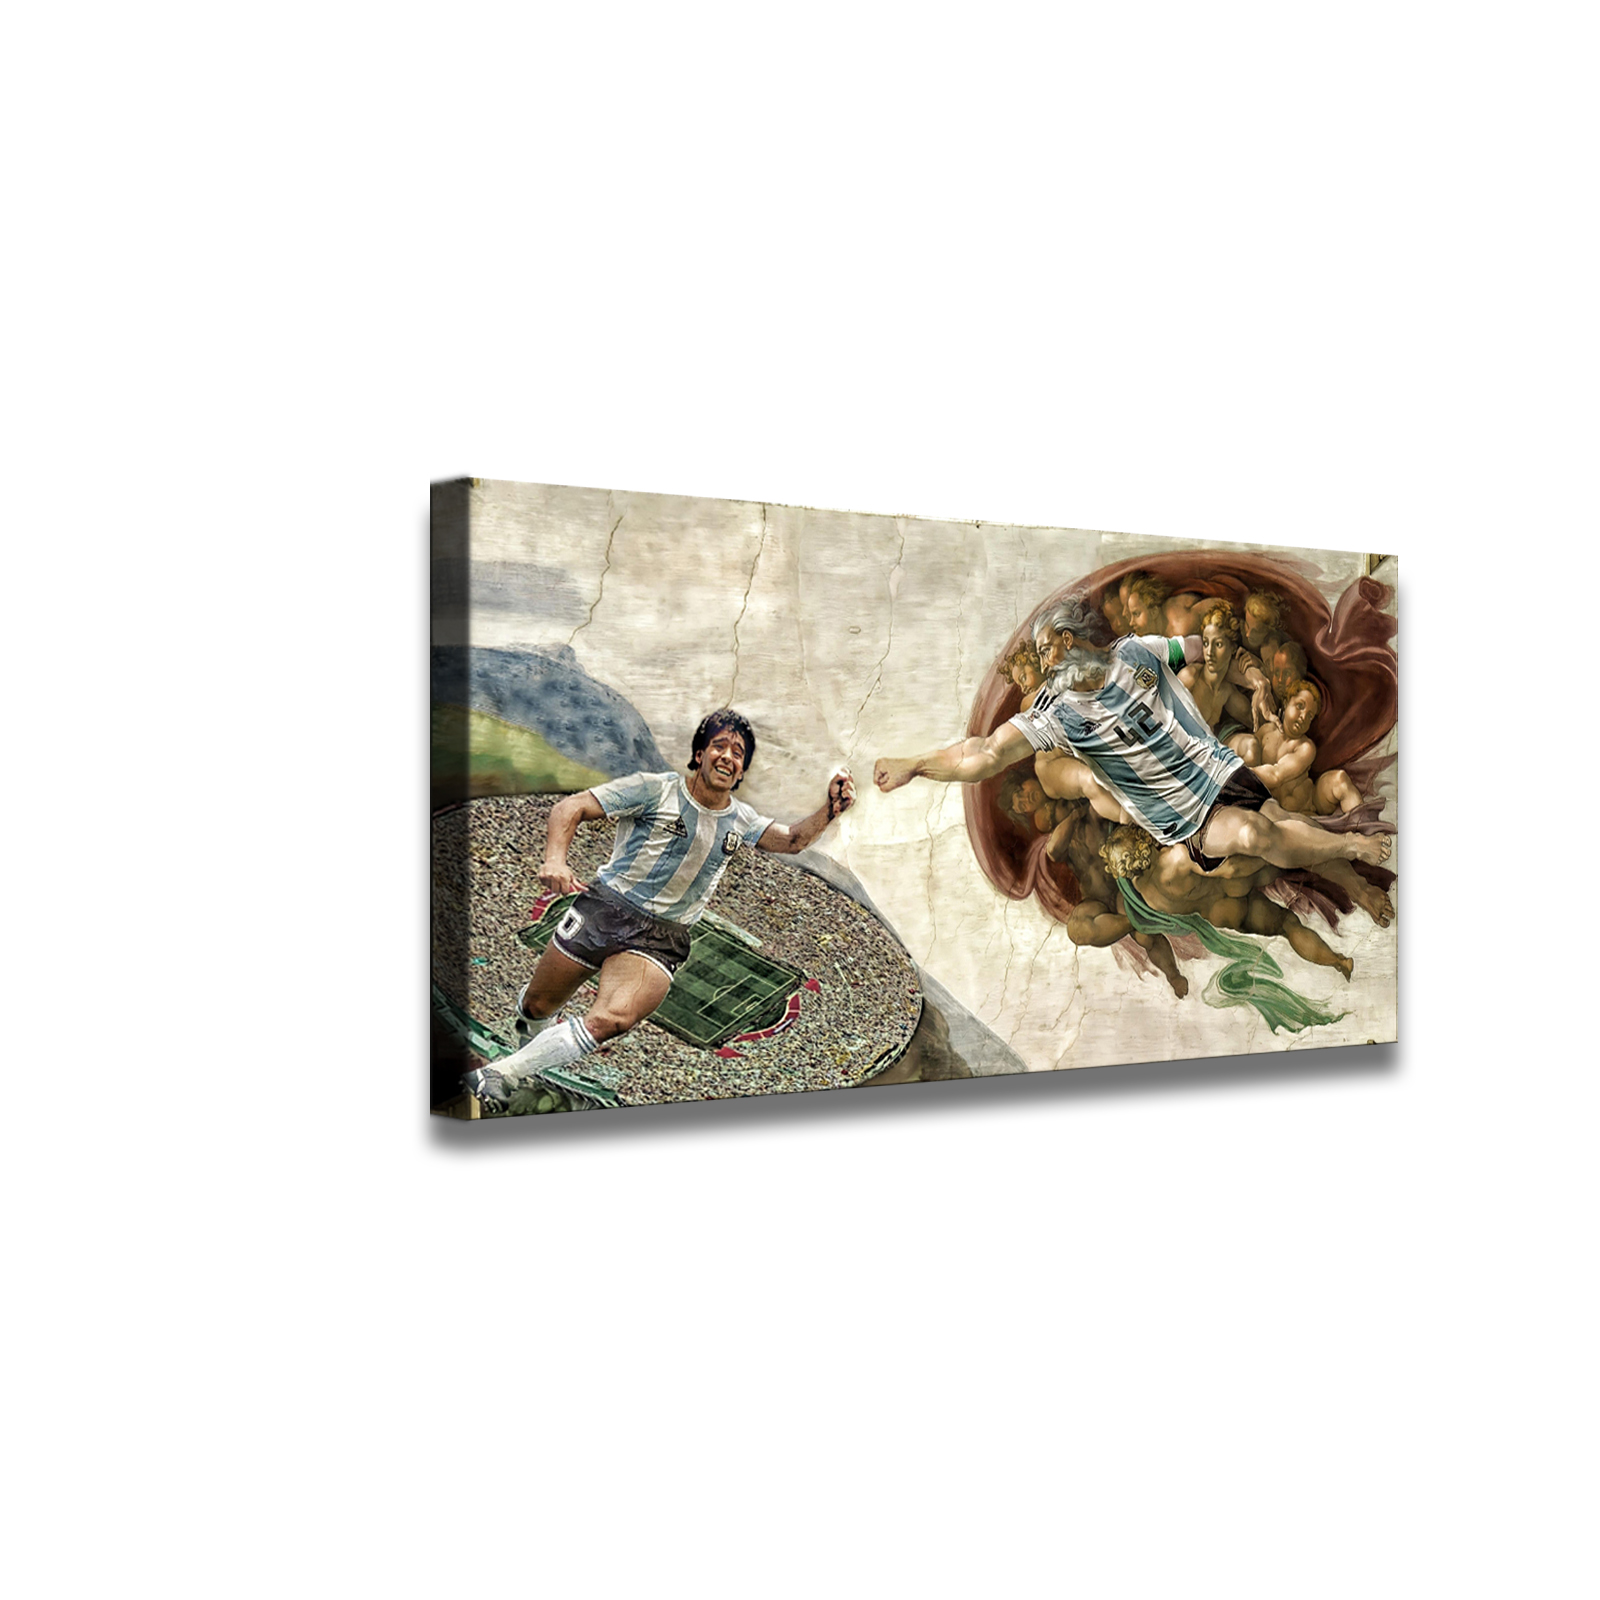 Diego Maradona - Hand of God HD Canvas Print Home Decor Paintings Wall Art Pictures